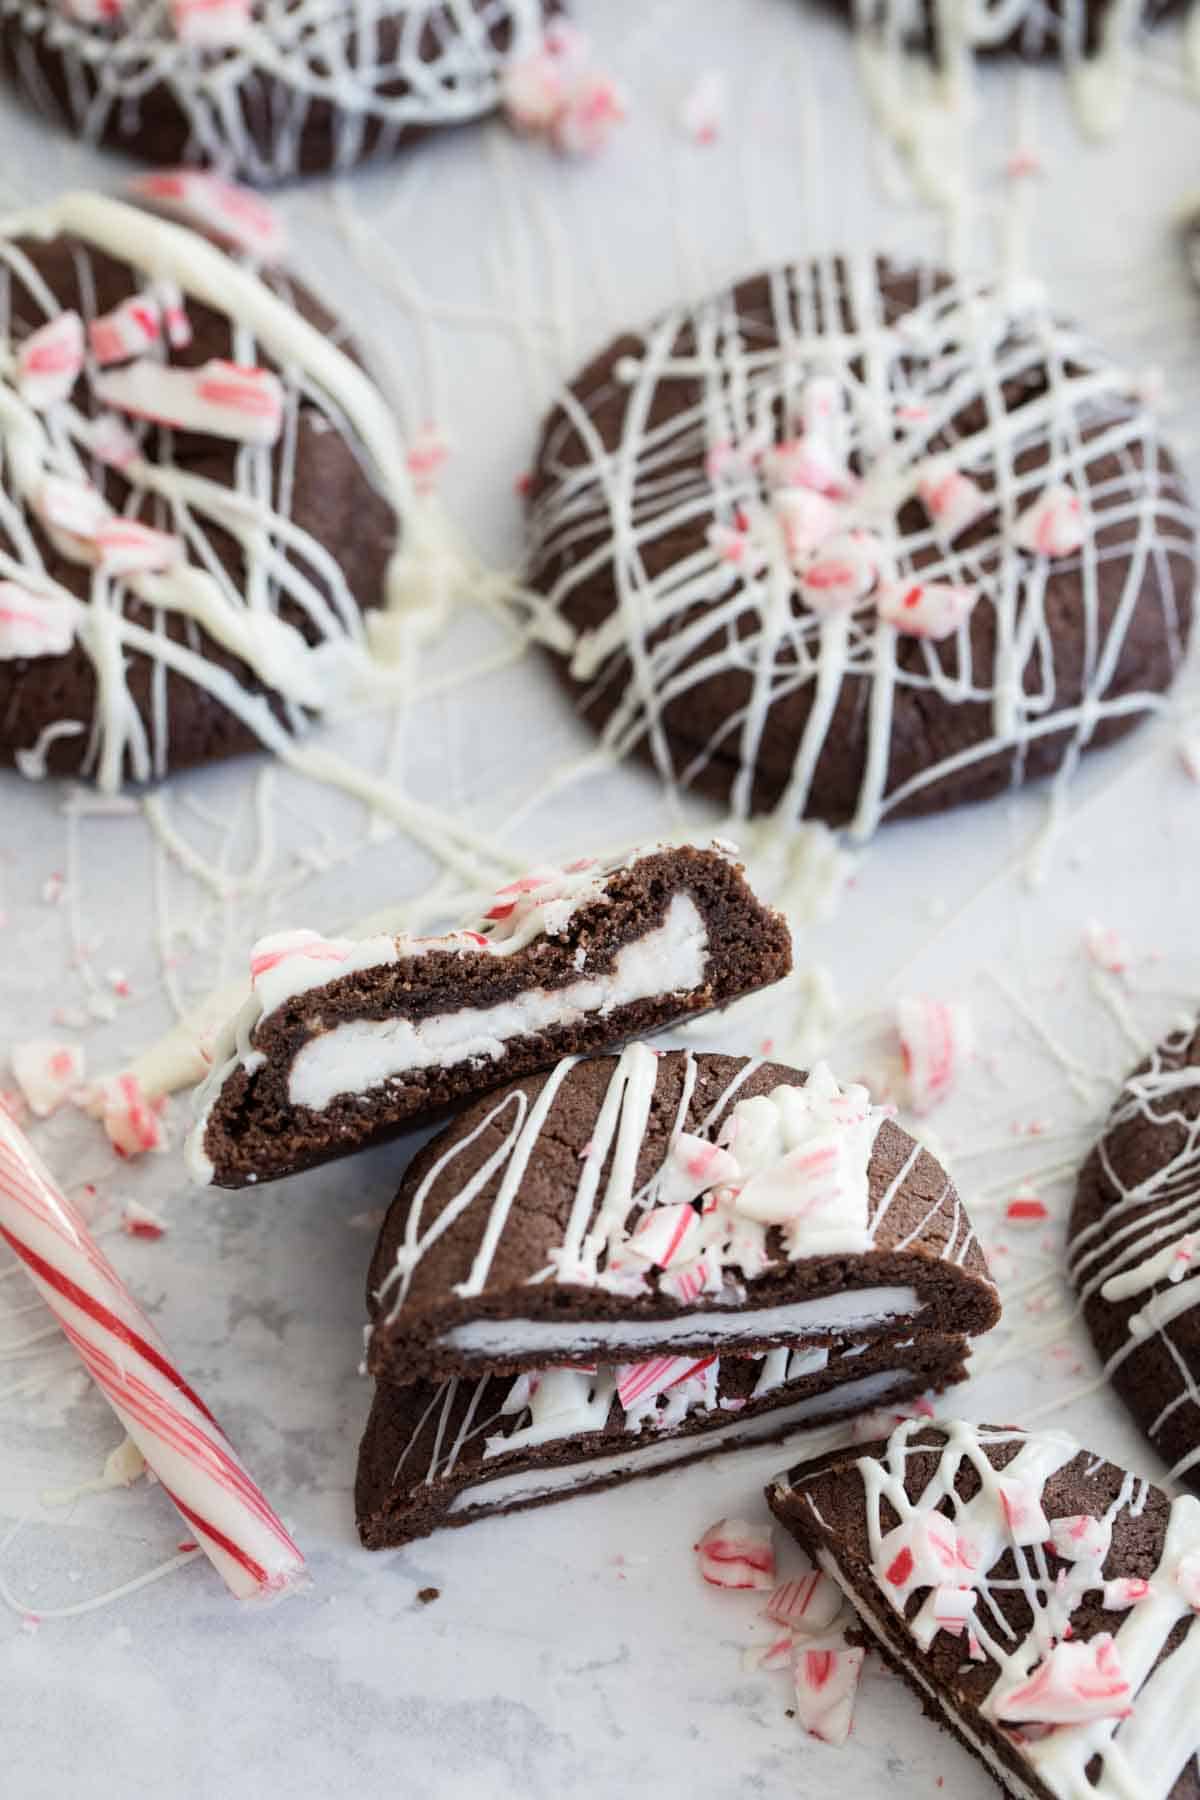 Chocolate Peppermint Cookies recipe with cookie sliced in half to show peppermint patty on the inside.